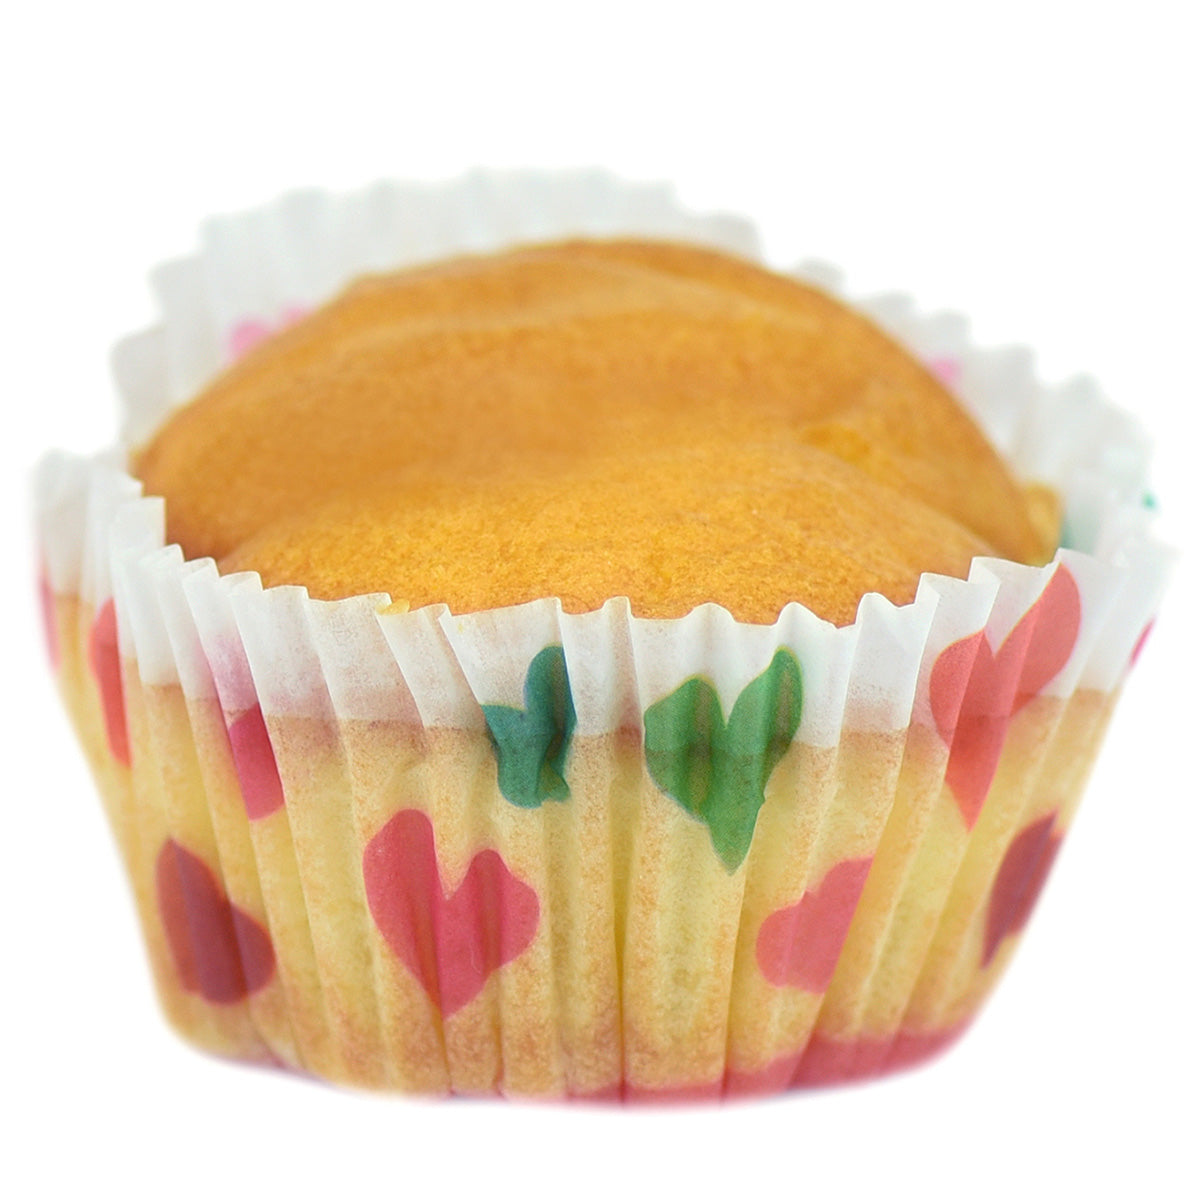 FiveSeasonStuff 100-Pack Cupcake Muffin Baking Paper Cases Liners Style 3